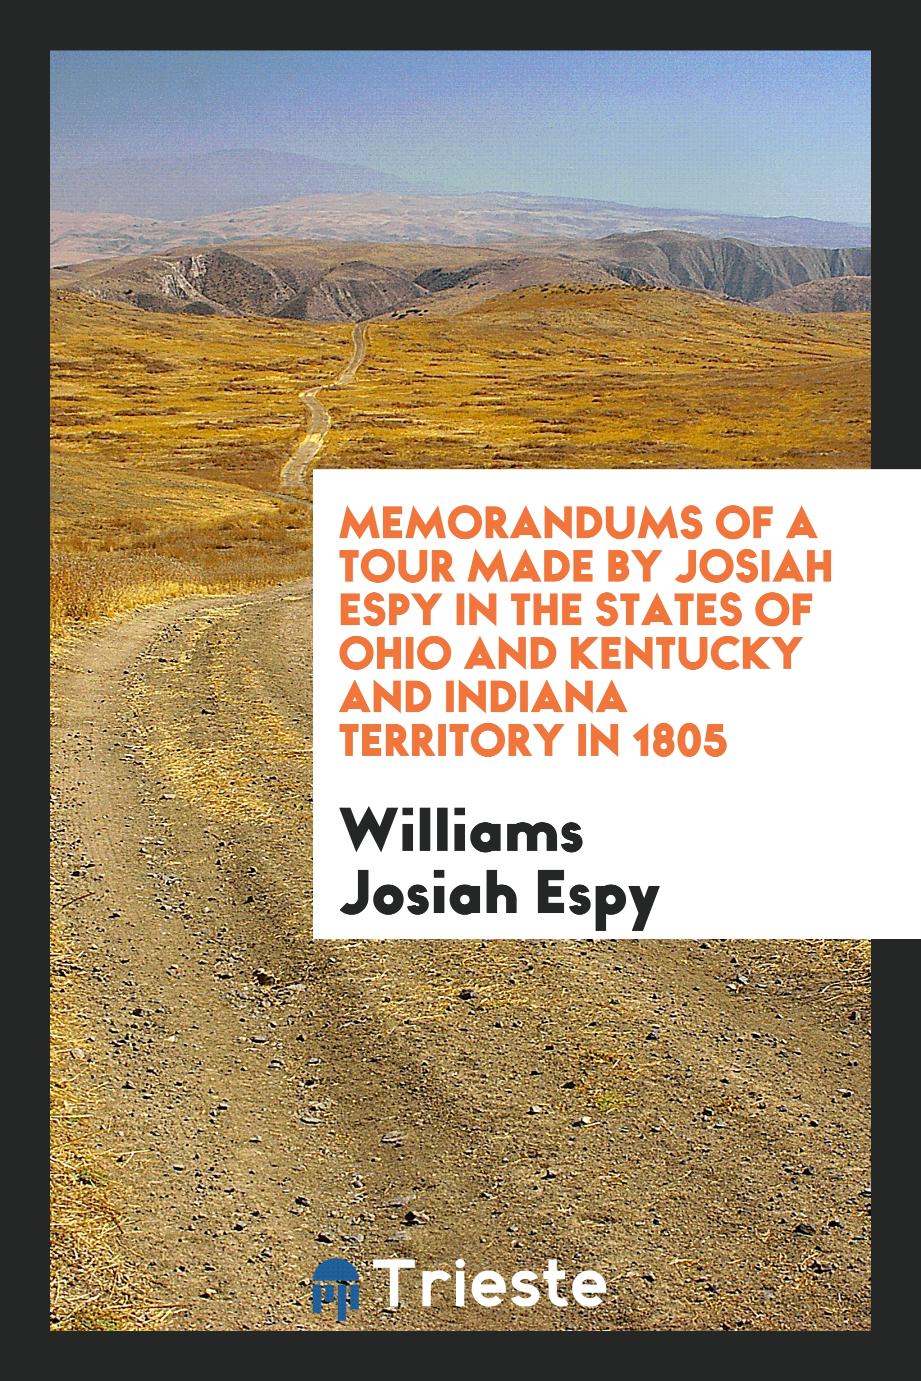 Memorandums of a Tour Made by Josiah Espy in the States of Ohio and Kentucky and Indiana Territory in 1805